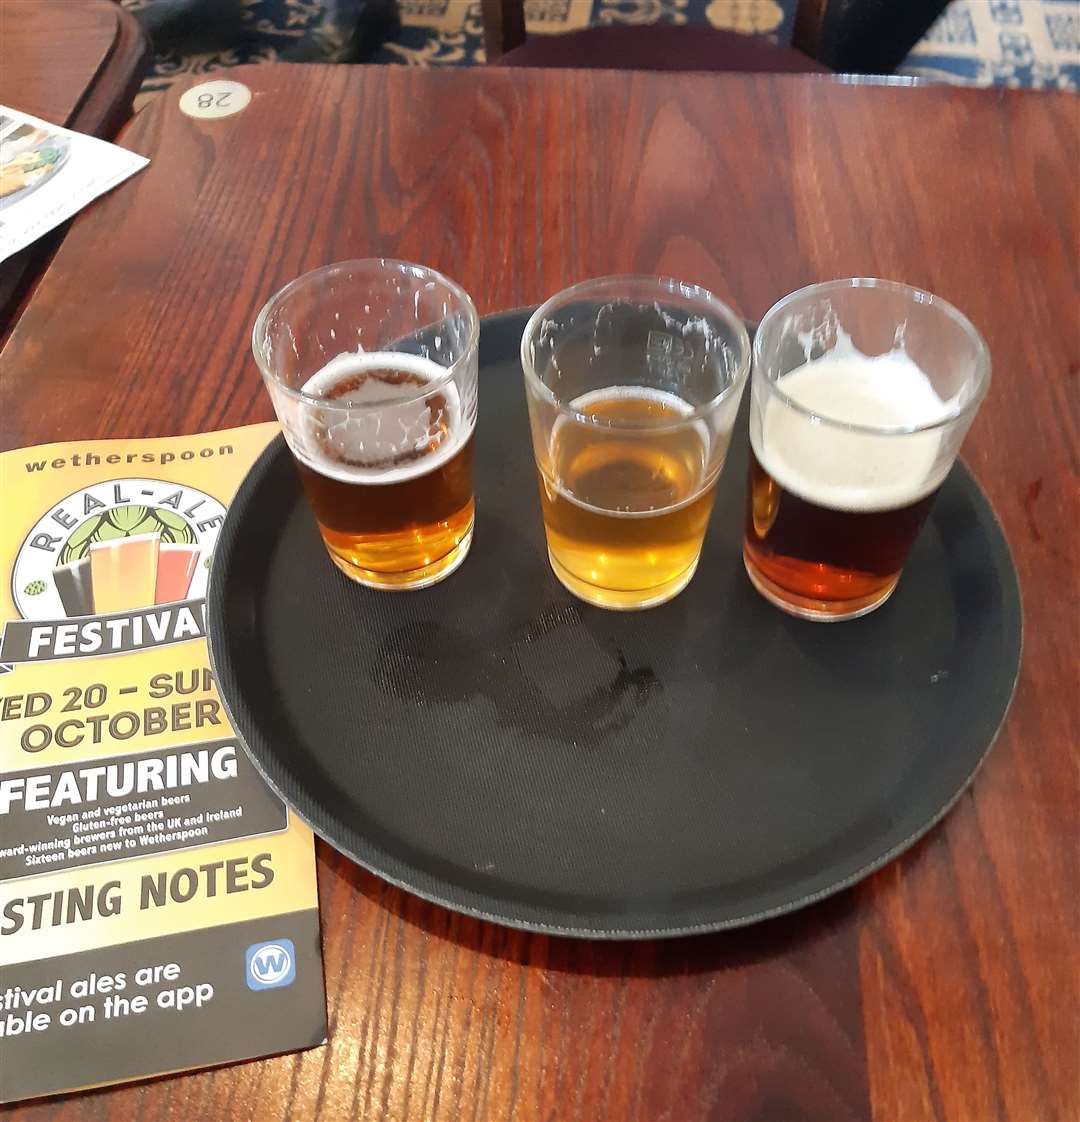 You can try three ales for the price of a festival pint at Wetherspoons this week. Photo: Sean Delaney